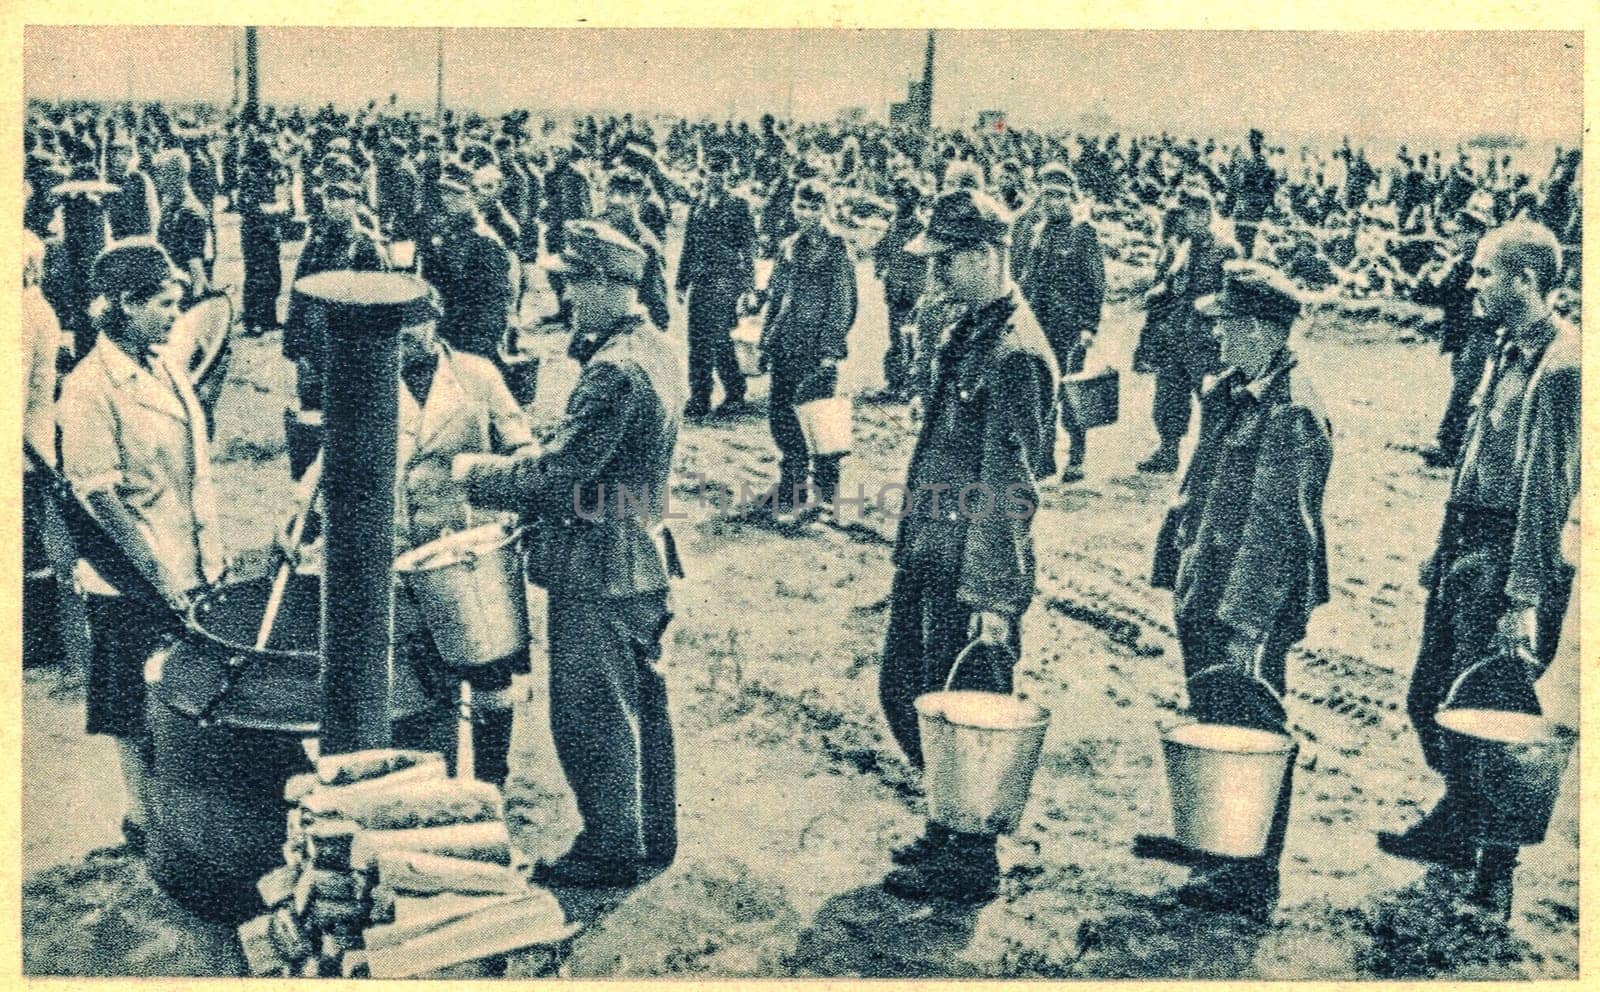 EAST EUROPE - 1944: German soldiers in POW camp. In the photo German soldiers are queuing for food, portion of soup.